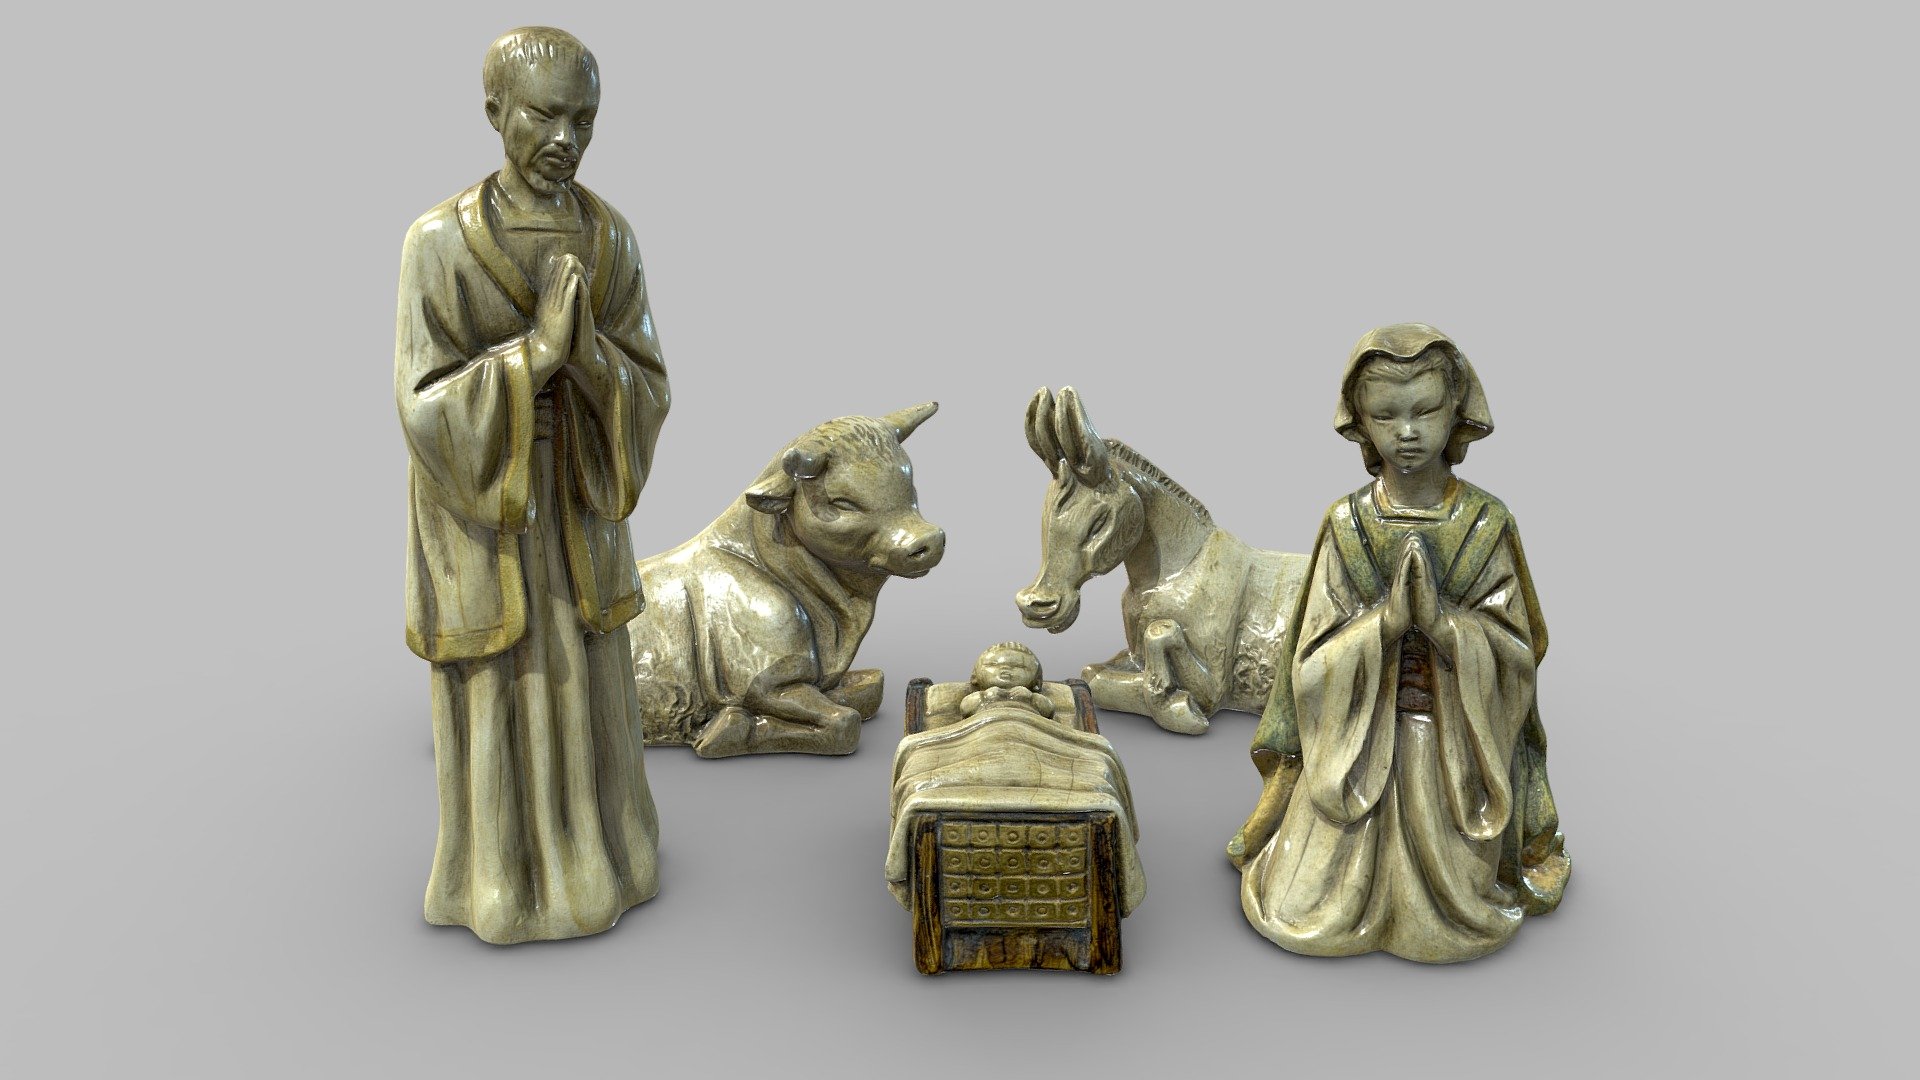 This antique nativity scene belonged to my grandmother. It has no economic value in itself but it has sentimental value for me so I have decided to scan it and make 3D printing copies for my family.

This photogrammetry set is composed by the five typical figurines (Saint Joseph, Mary, Baby Jesus, a donkey and an ox). It is optimized in 3 different versions of polygons (between 20K-80K-300K) and it includes normal, ambient &amp; occlusion and cavity maps.

You can see each figurine with more detail in the following links:


Joseph: https://skfb.ly/6XEtZ
Mary: https://skfb.ly/6XE9n
Baby Jesus: https://skfb.ly/6XEtW
Ox: https://skfb.ly/6XEtS
Donkey: https://skfb.ly/6XEtU

Description:


Year: 60's
Material: Porcelain
Origin: Spain
 - Ceramic Nativity scene Belén Porcelain figurines - Buy Royalty Free 3D model by Ximo Vilaplana (@ximovilaplana) 3d model